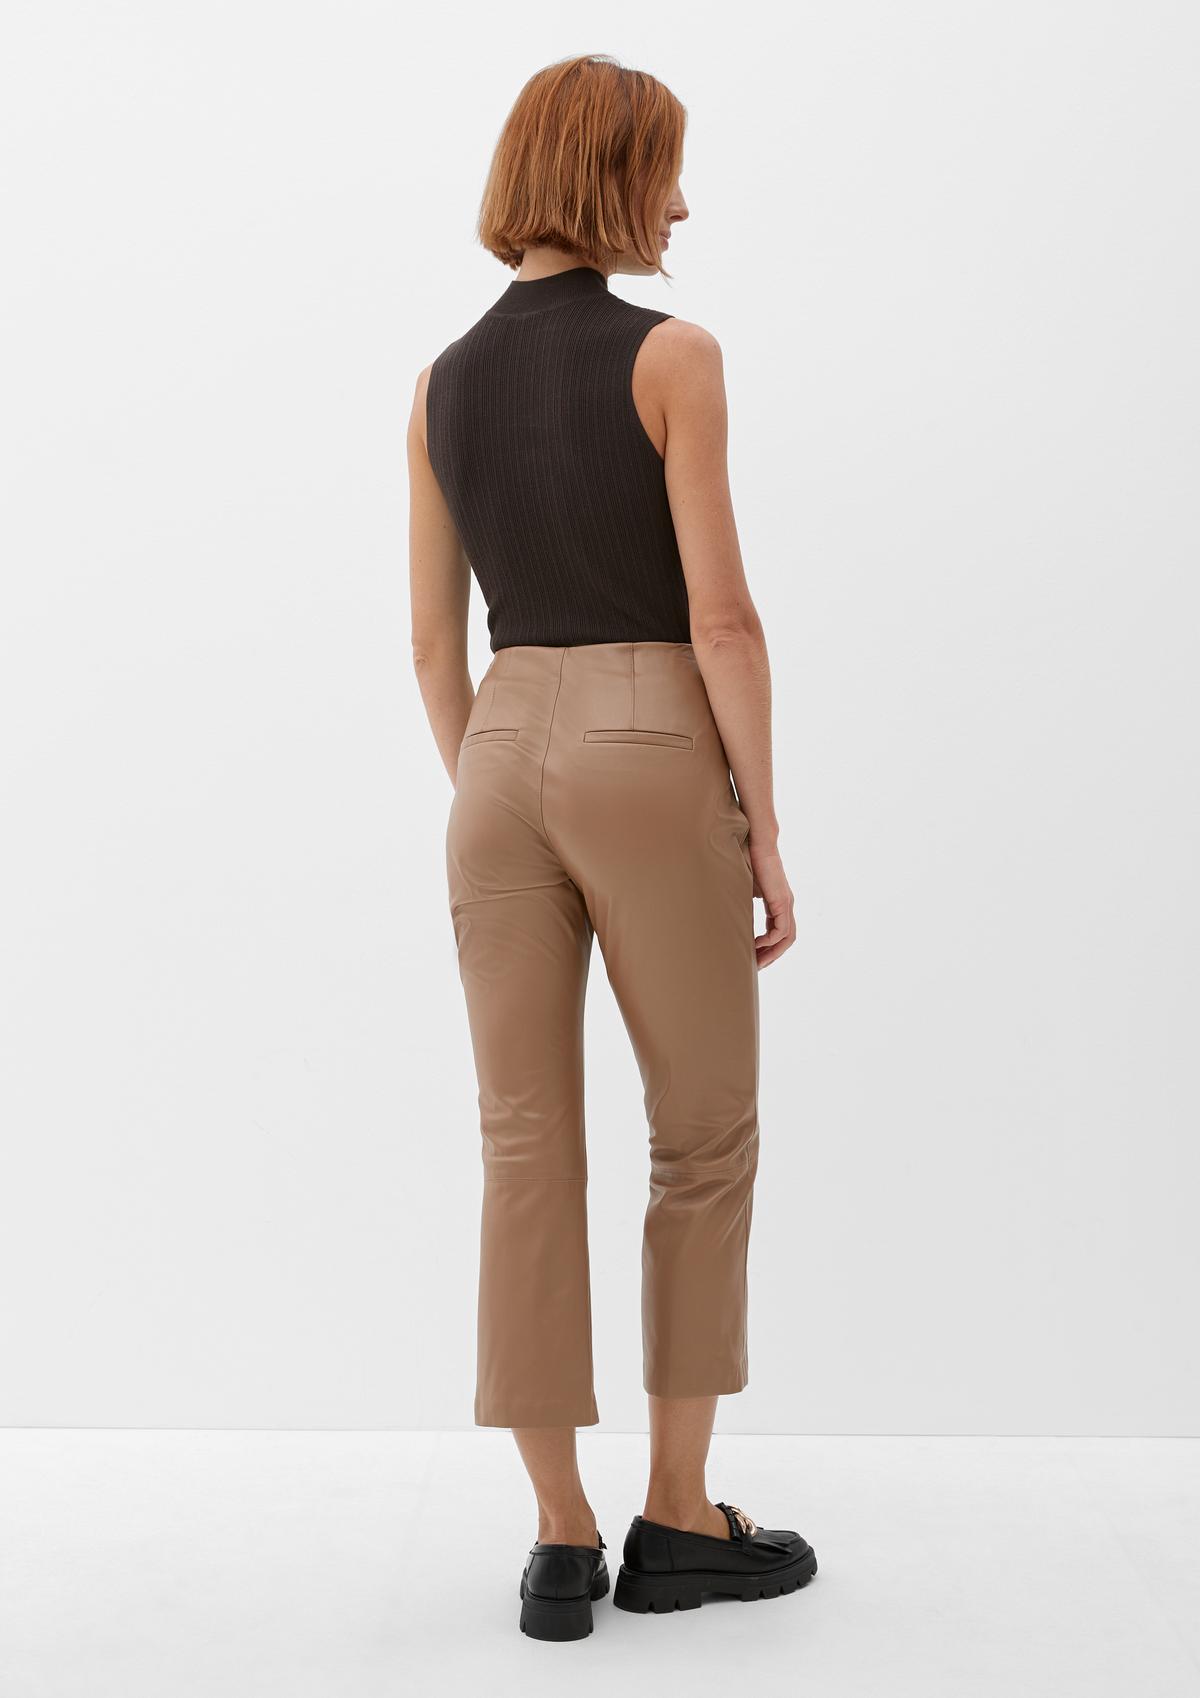 High-waisted slim faux leather trousers